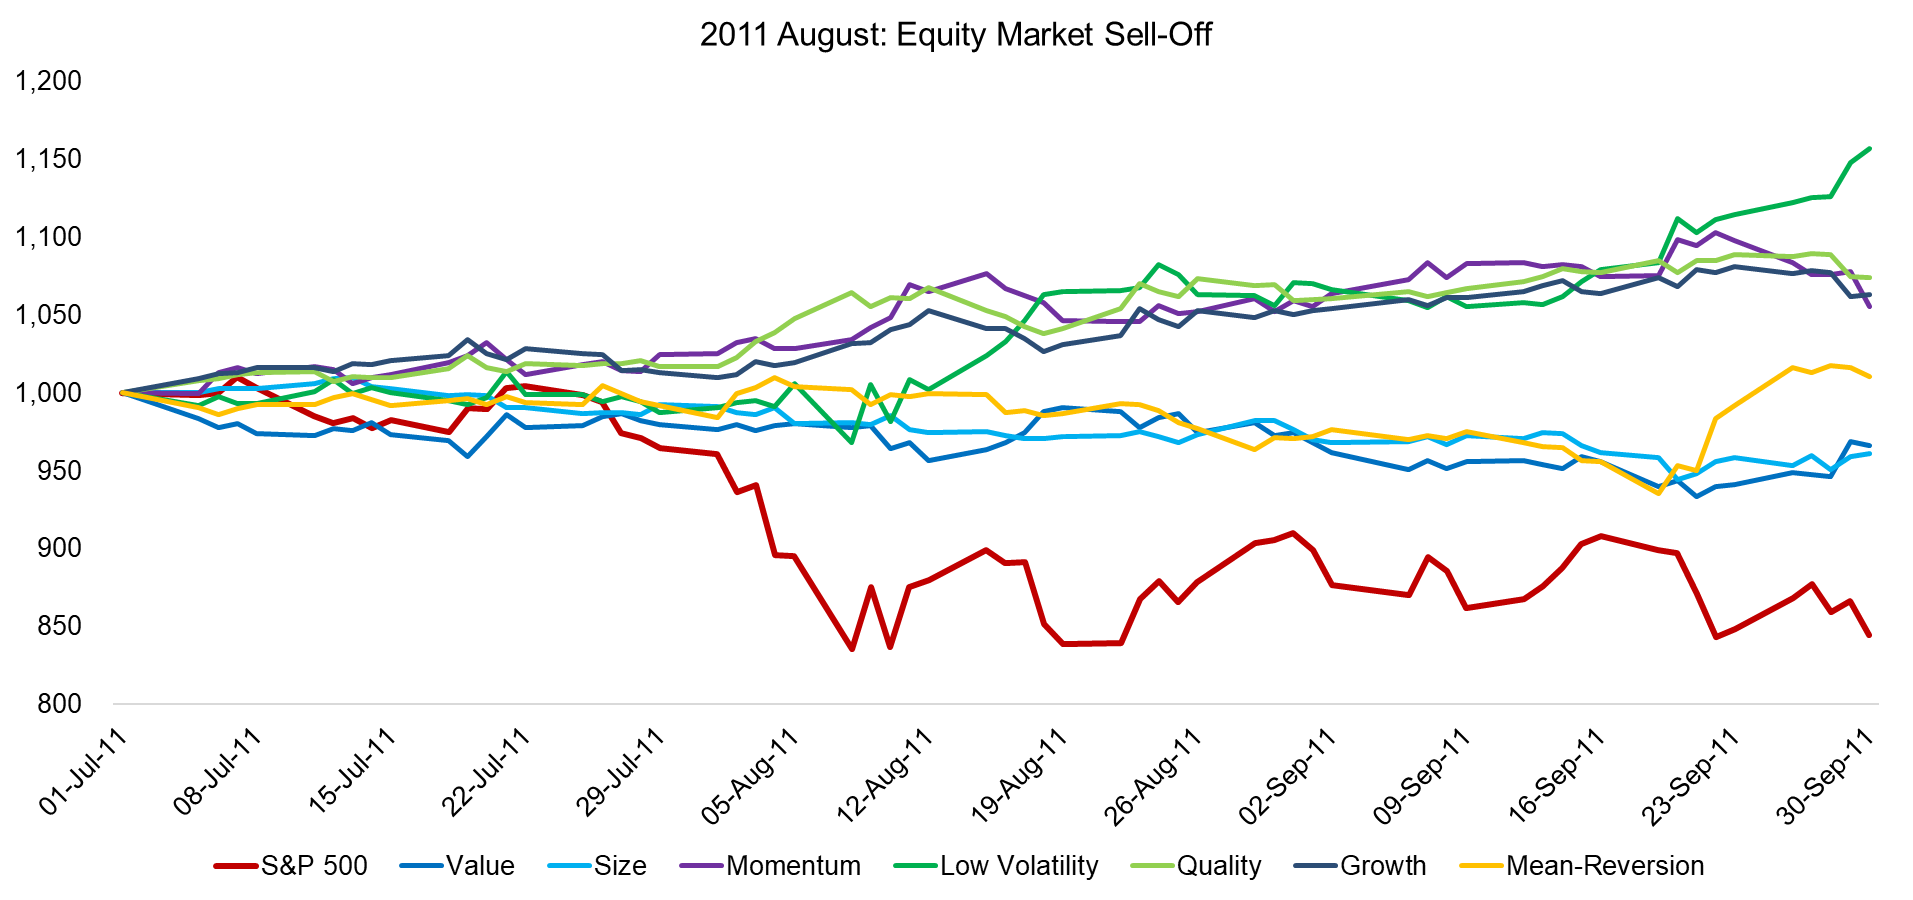 2011 August Equity Market Sell-Off